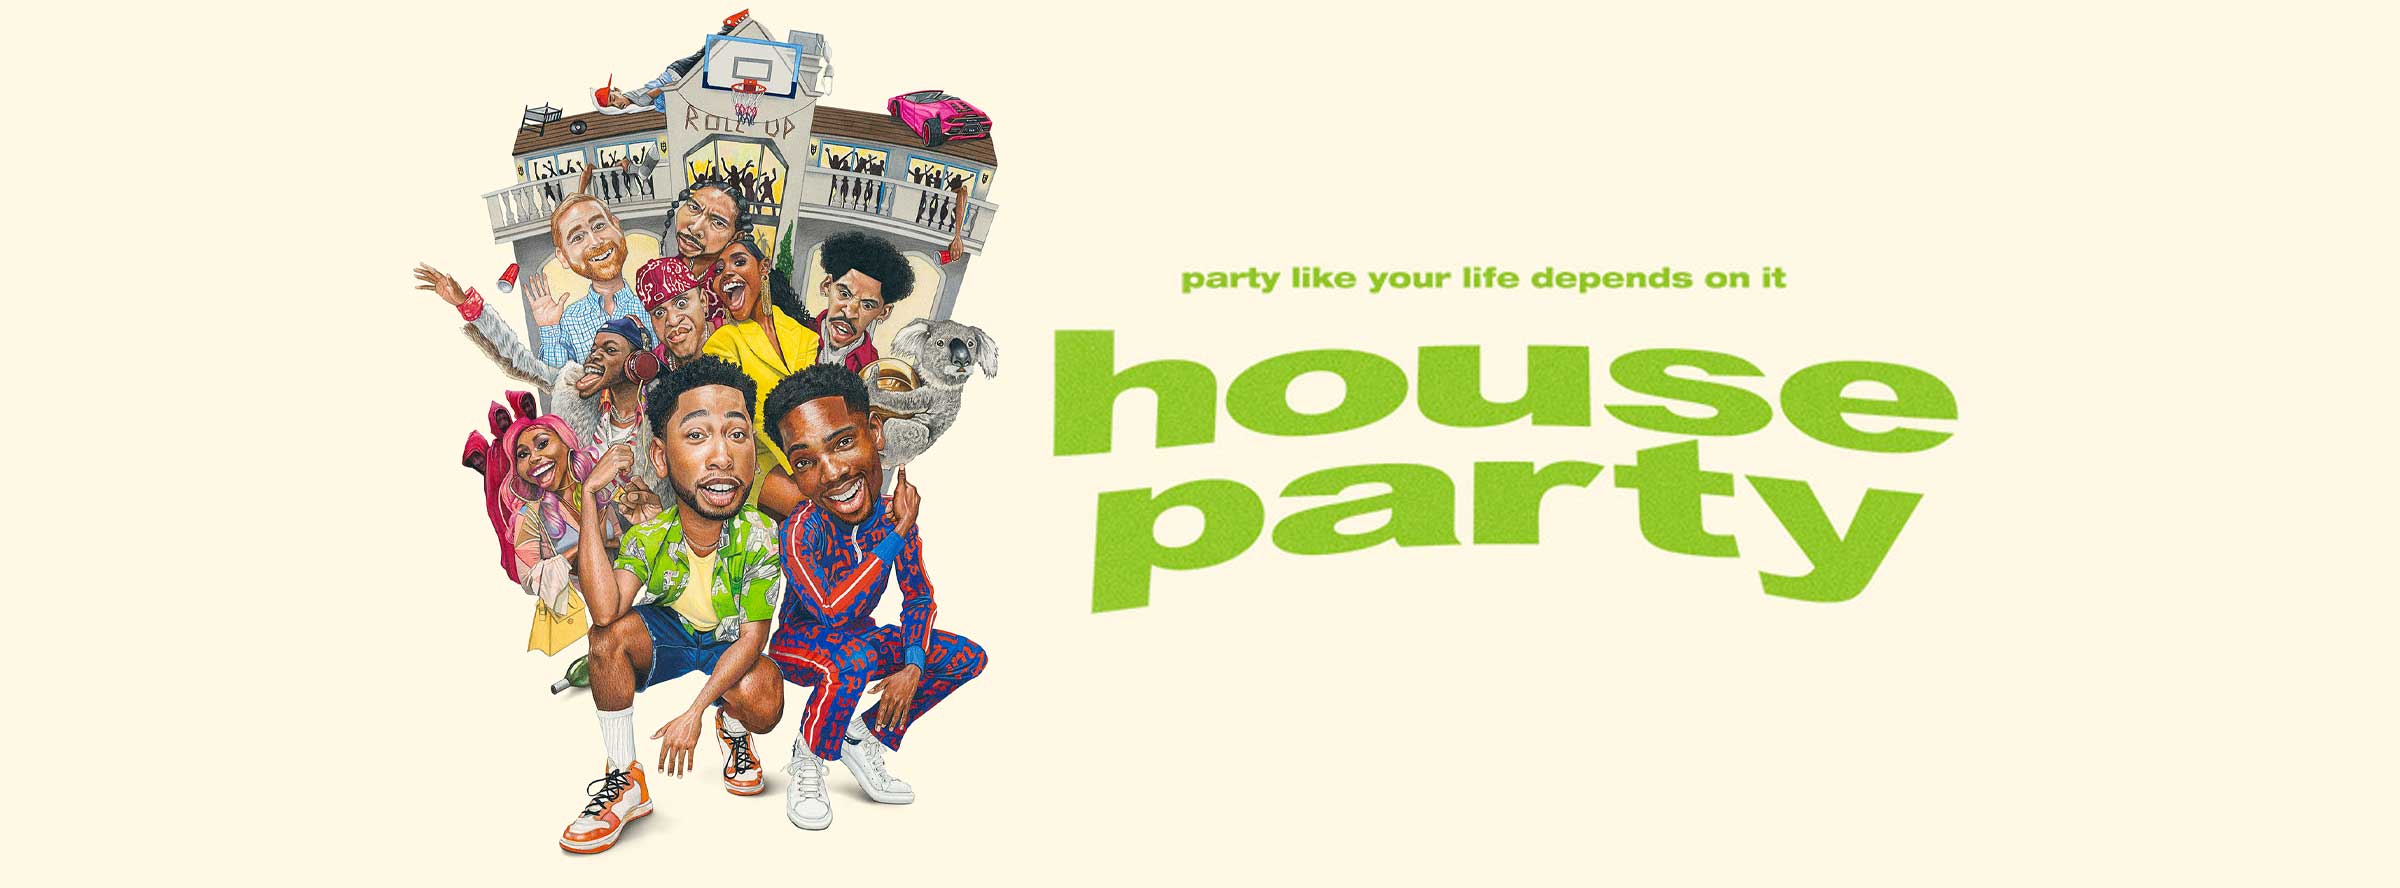 Slider Image for House Party